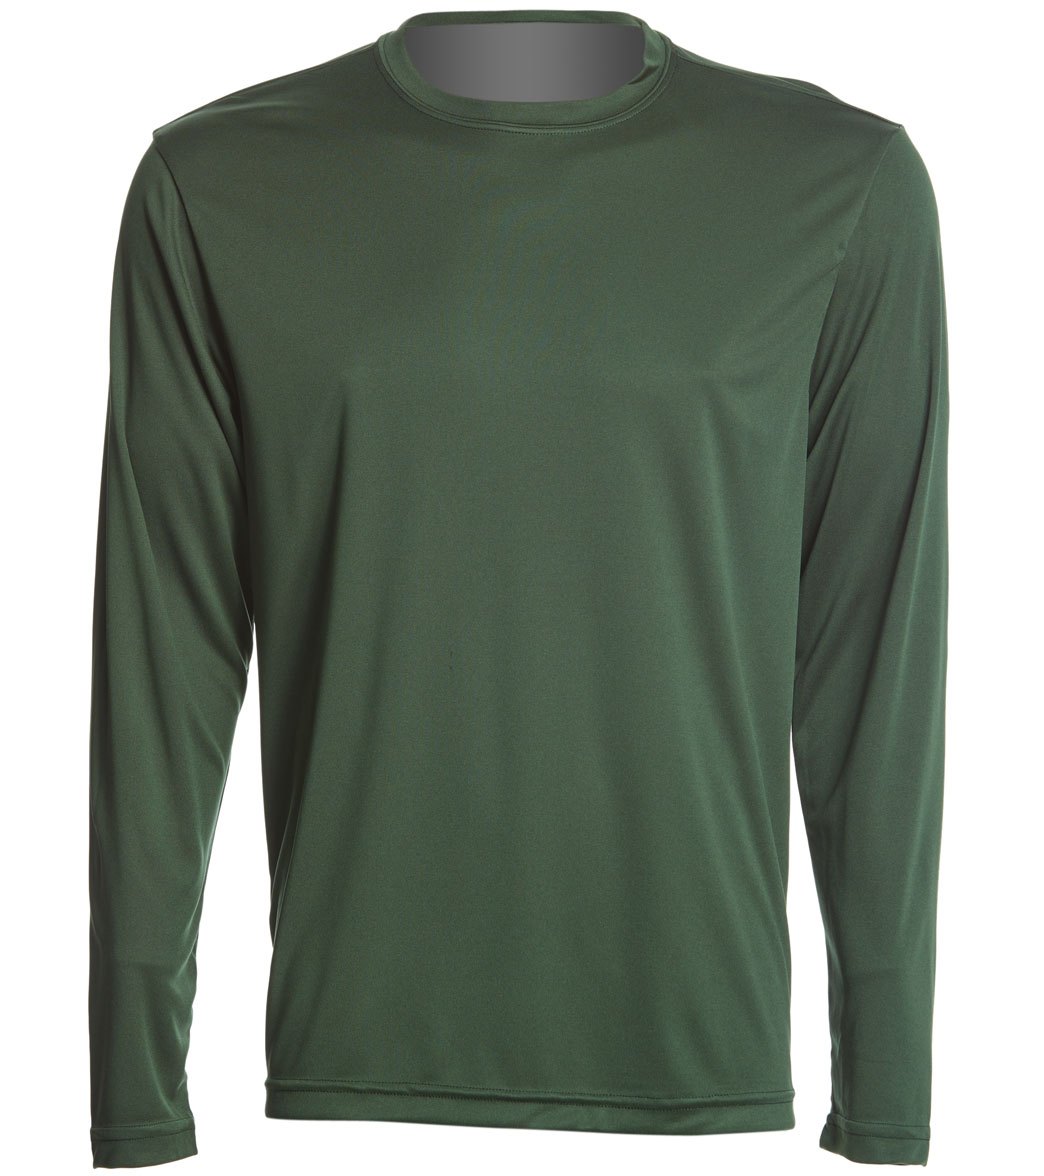 Long Sleeve Posicharge Competitortm Tee Shirt - Forest Green Medium Polyester - Swimoutlet.com